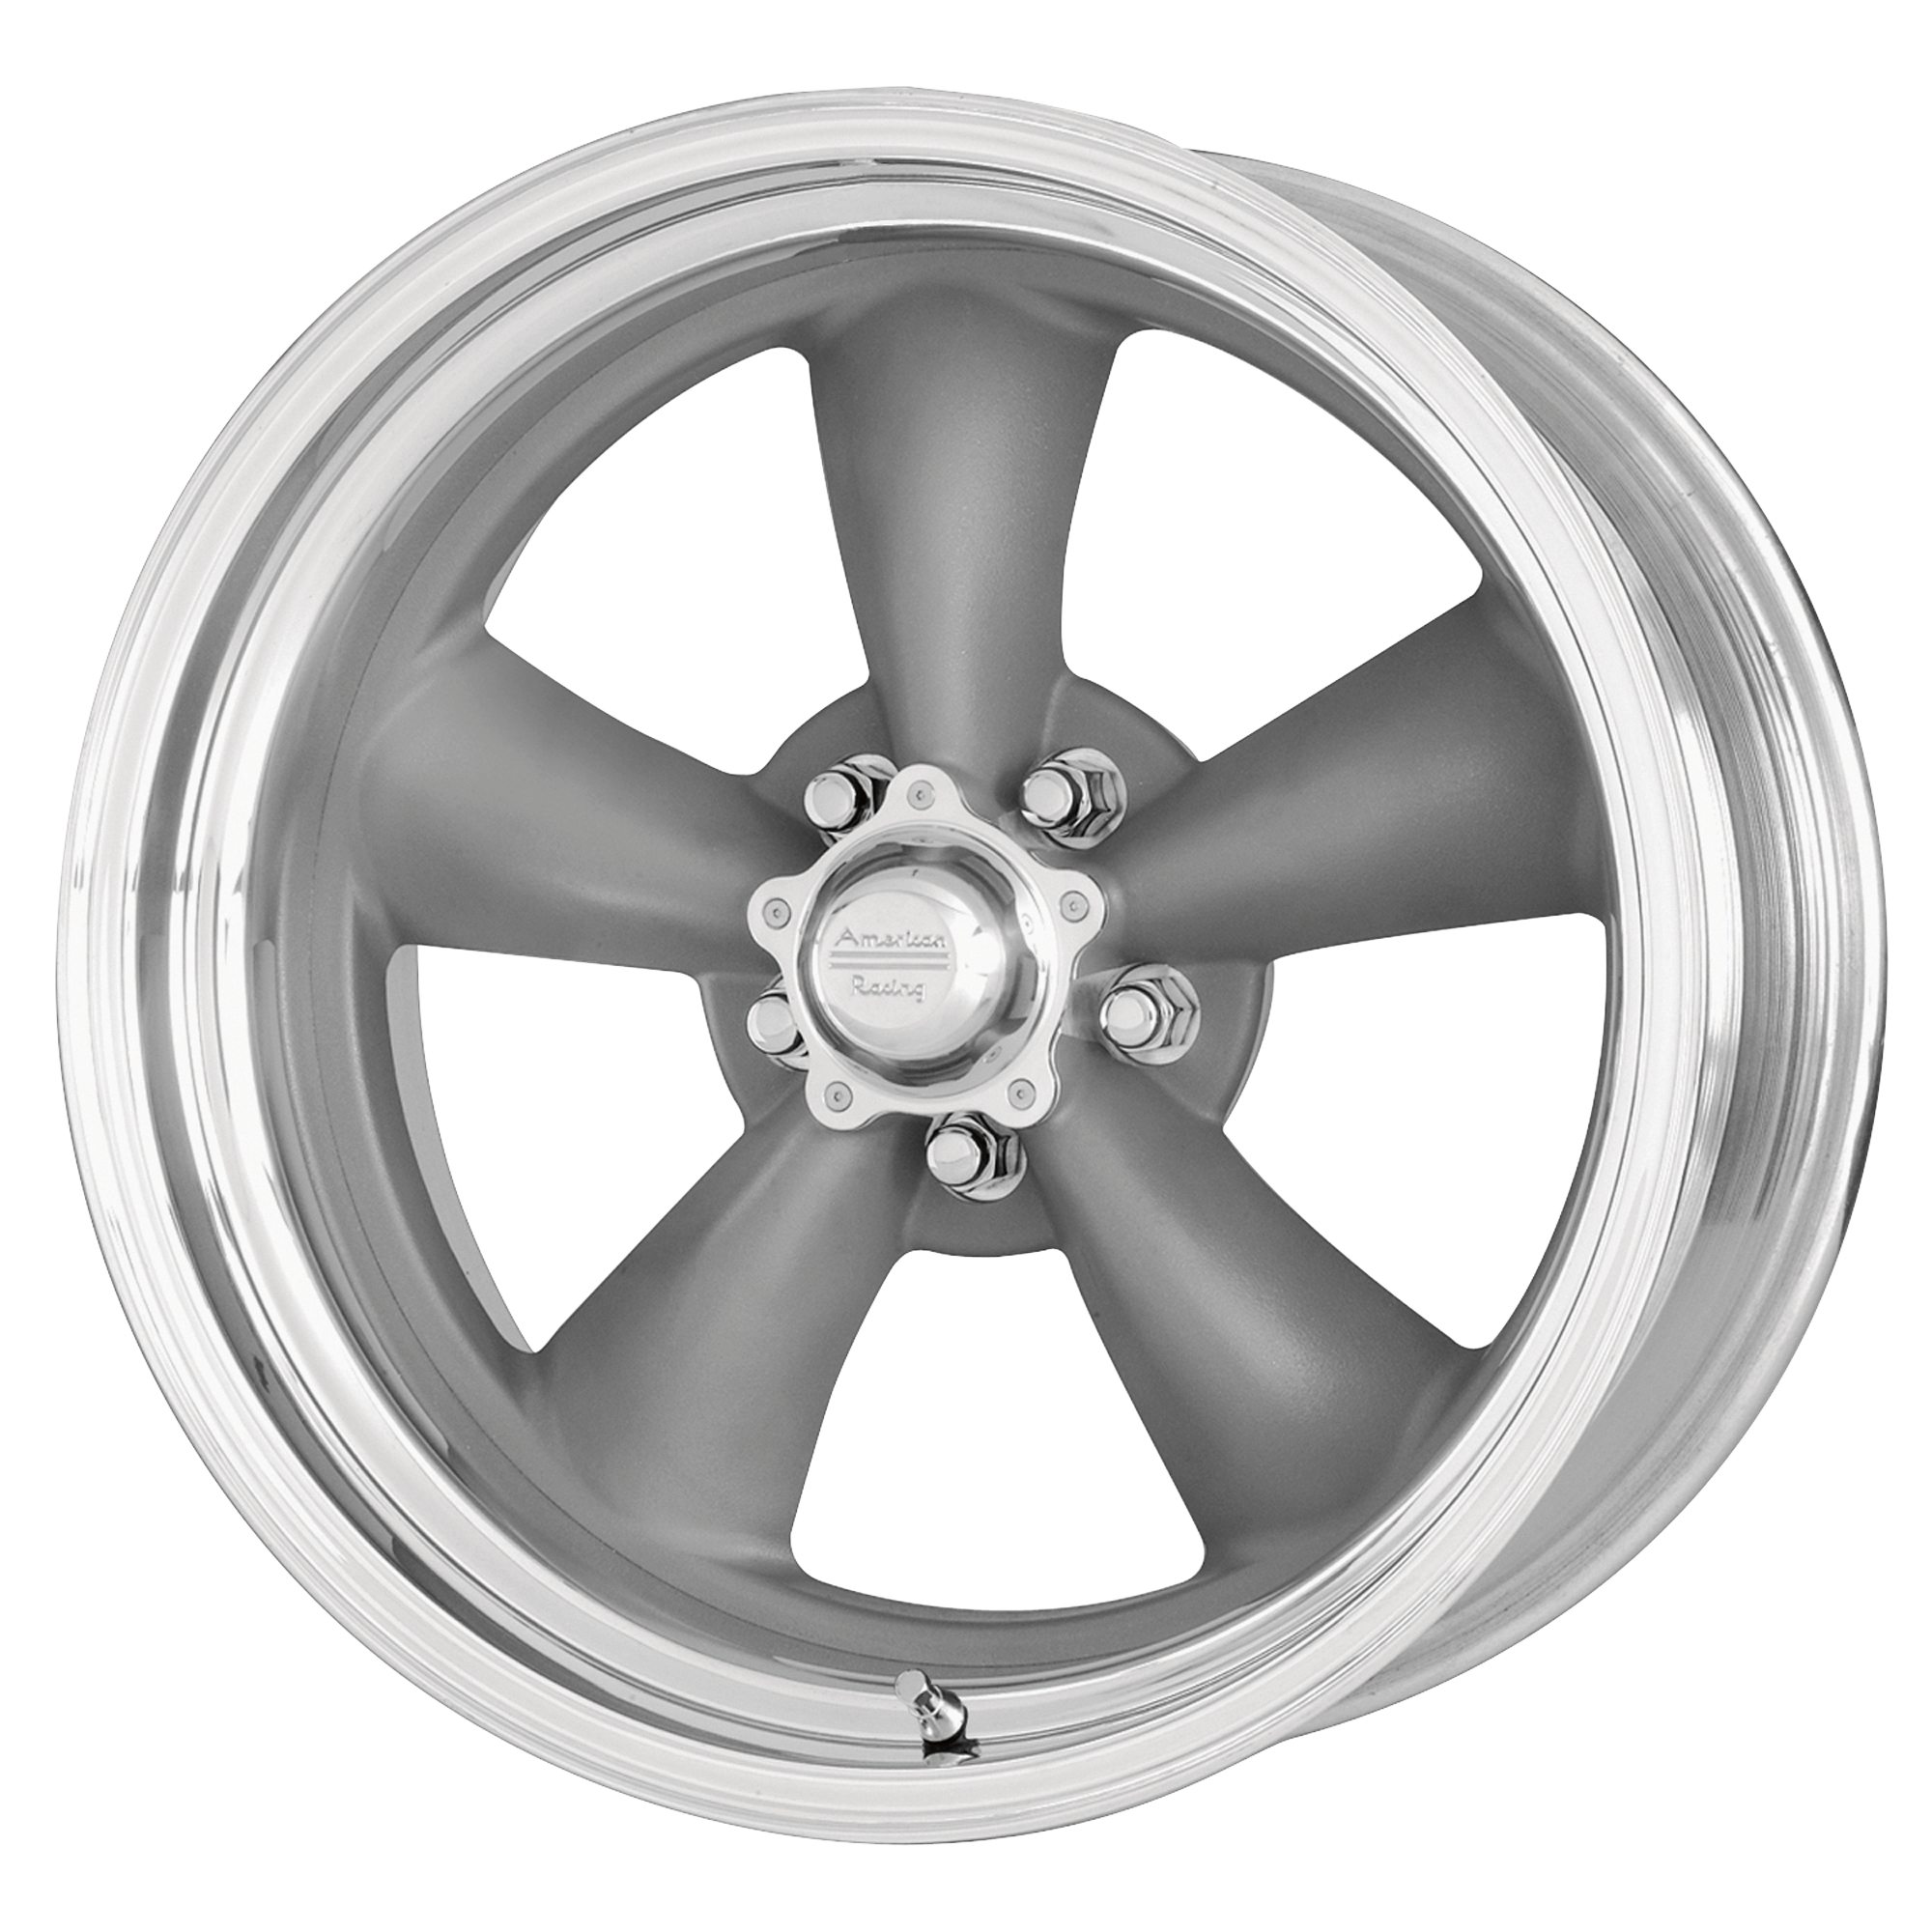 CLASSIC TORQ THRUST II ONE PIECE 17x8 5x127.00 MAG GRAY W/ MACHINED LIP (-11 mm) - Tires and Engine Performance